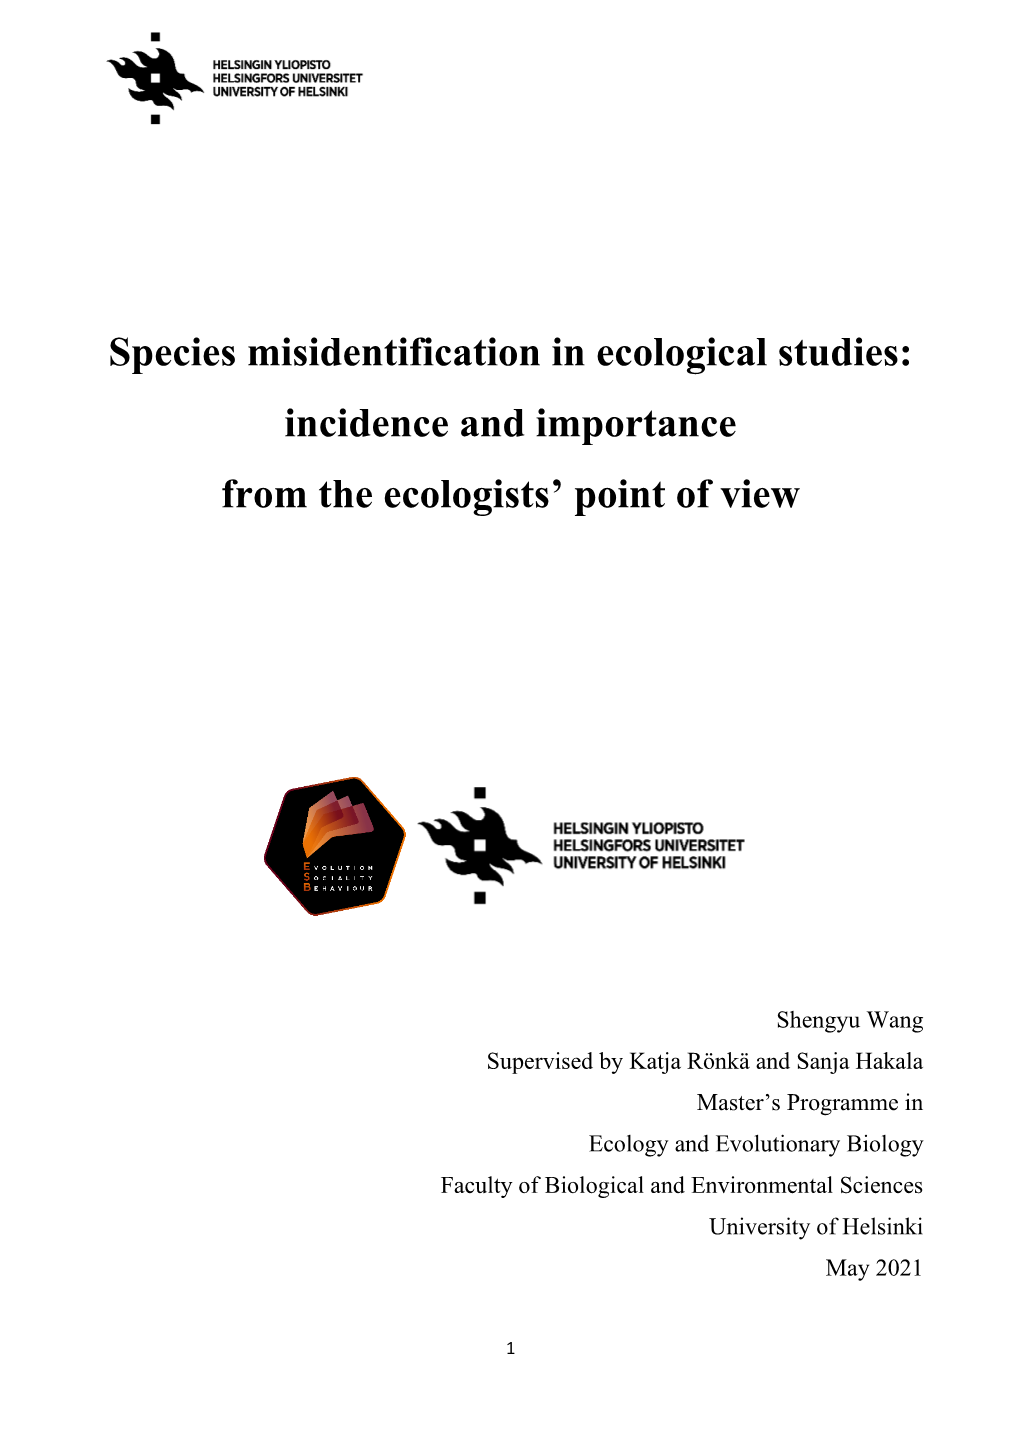 Species Misidentification in Ecological Studies: Incidence and Importance from the Ecologists’ Point of View